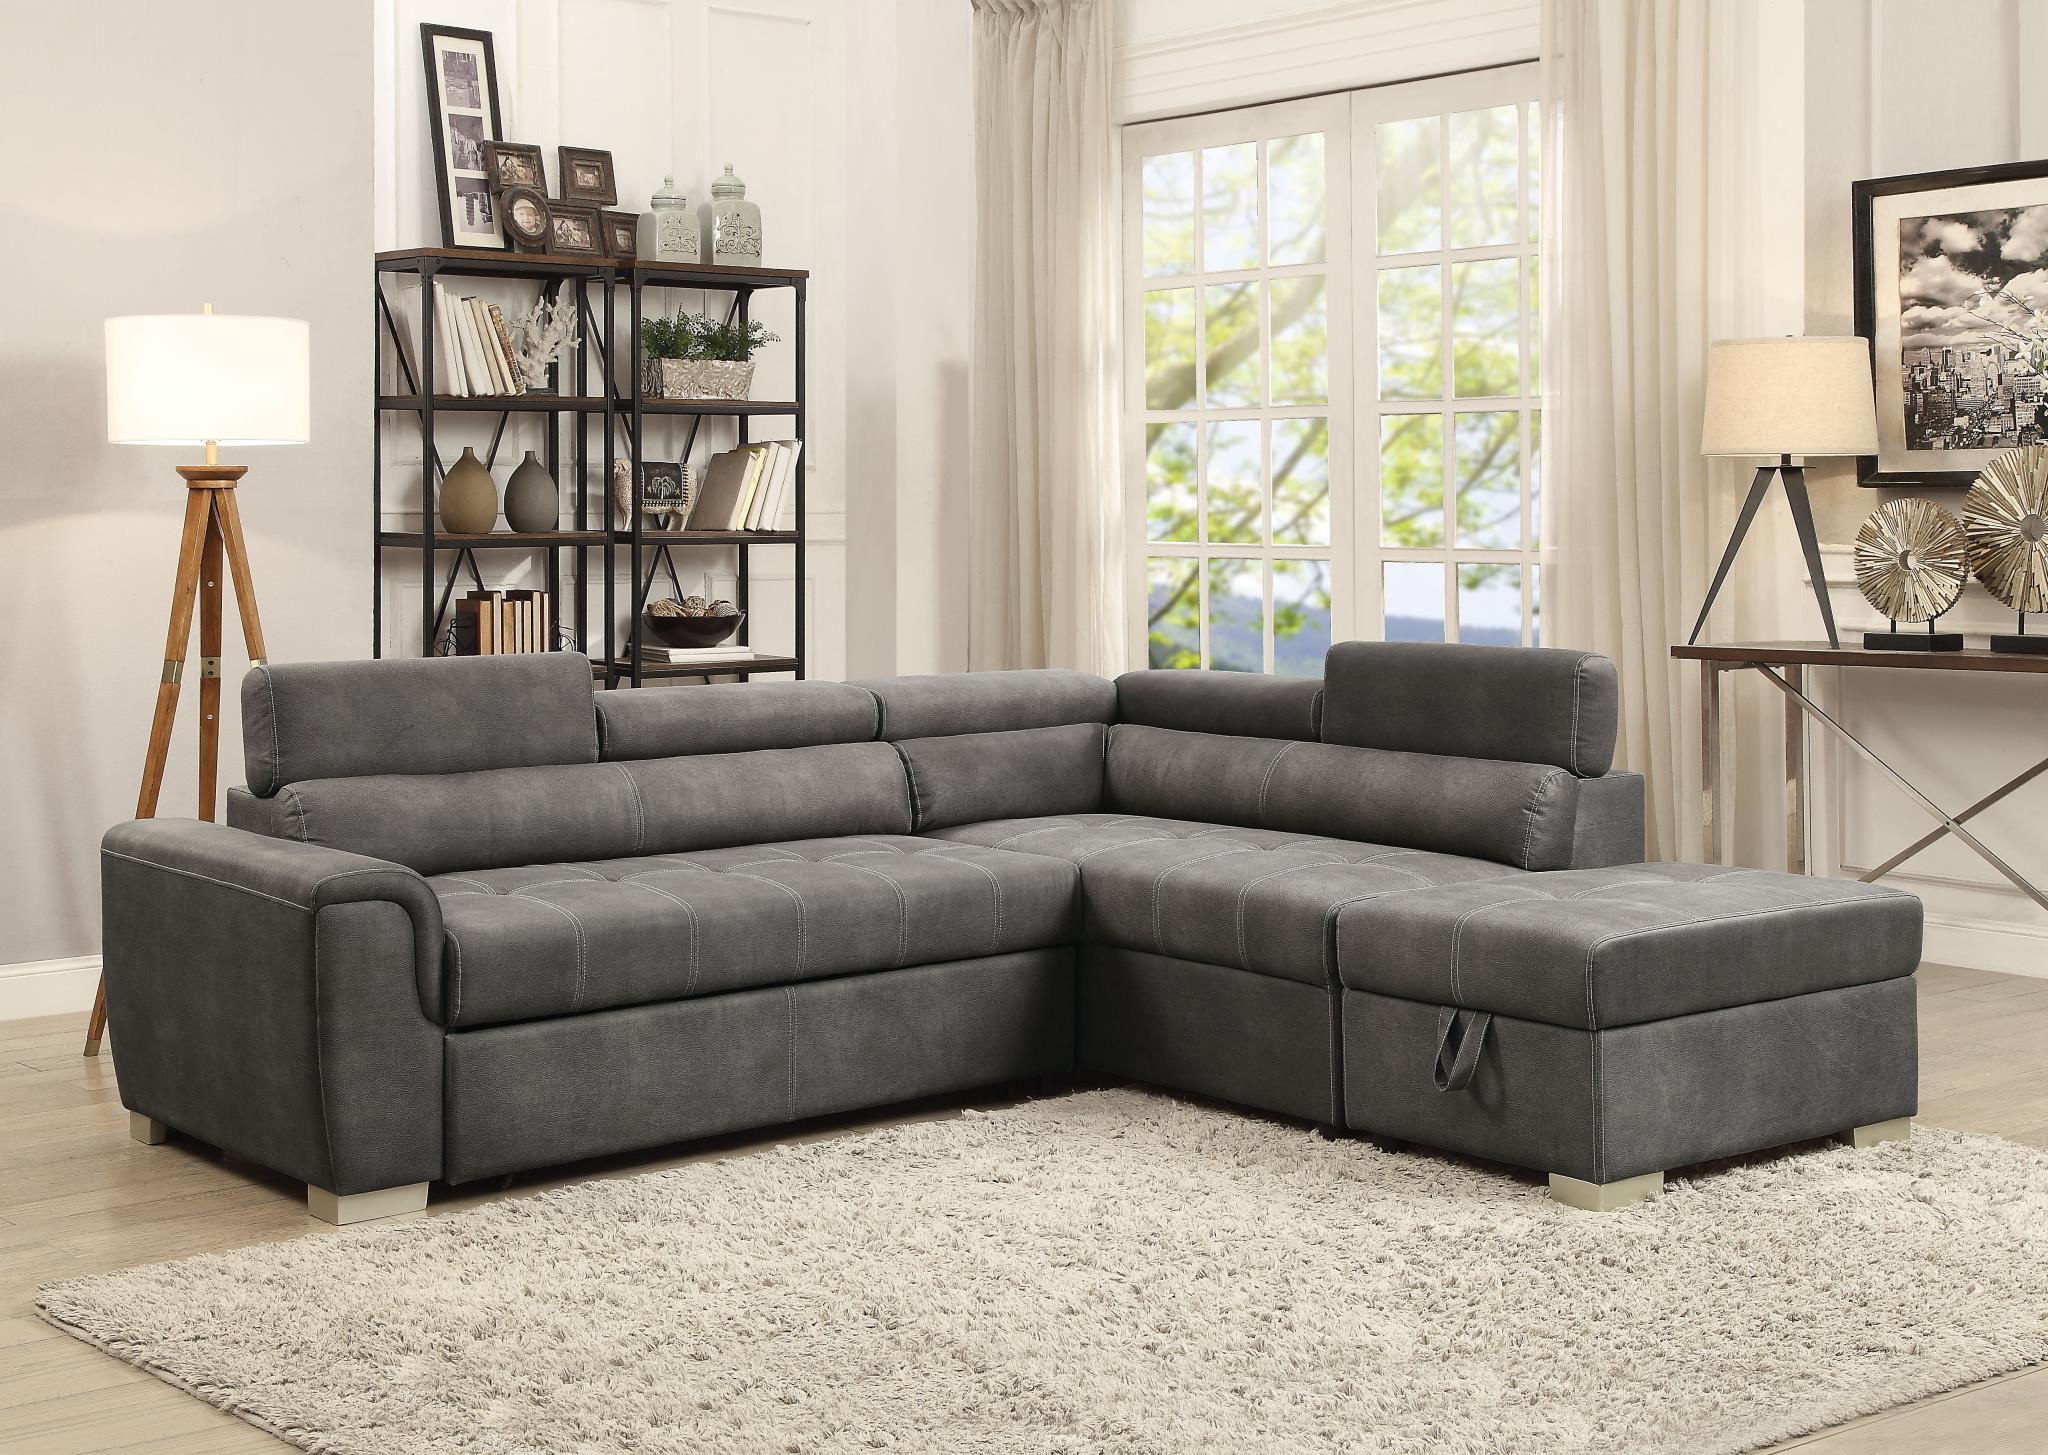 sofa sleeper beds on sale in indianapolis